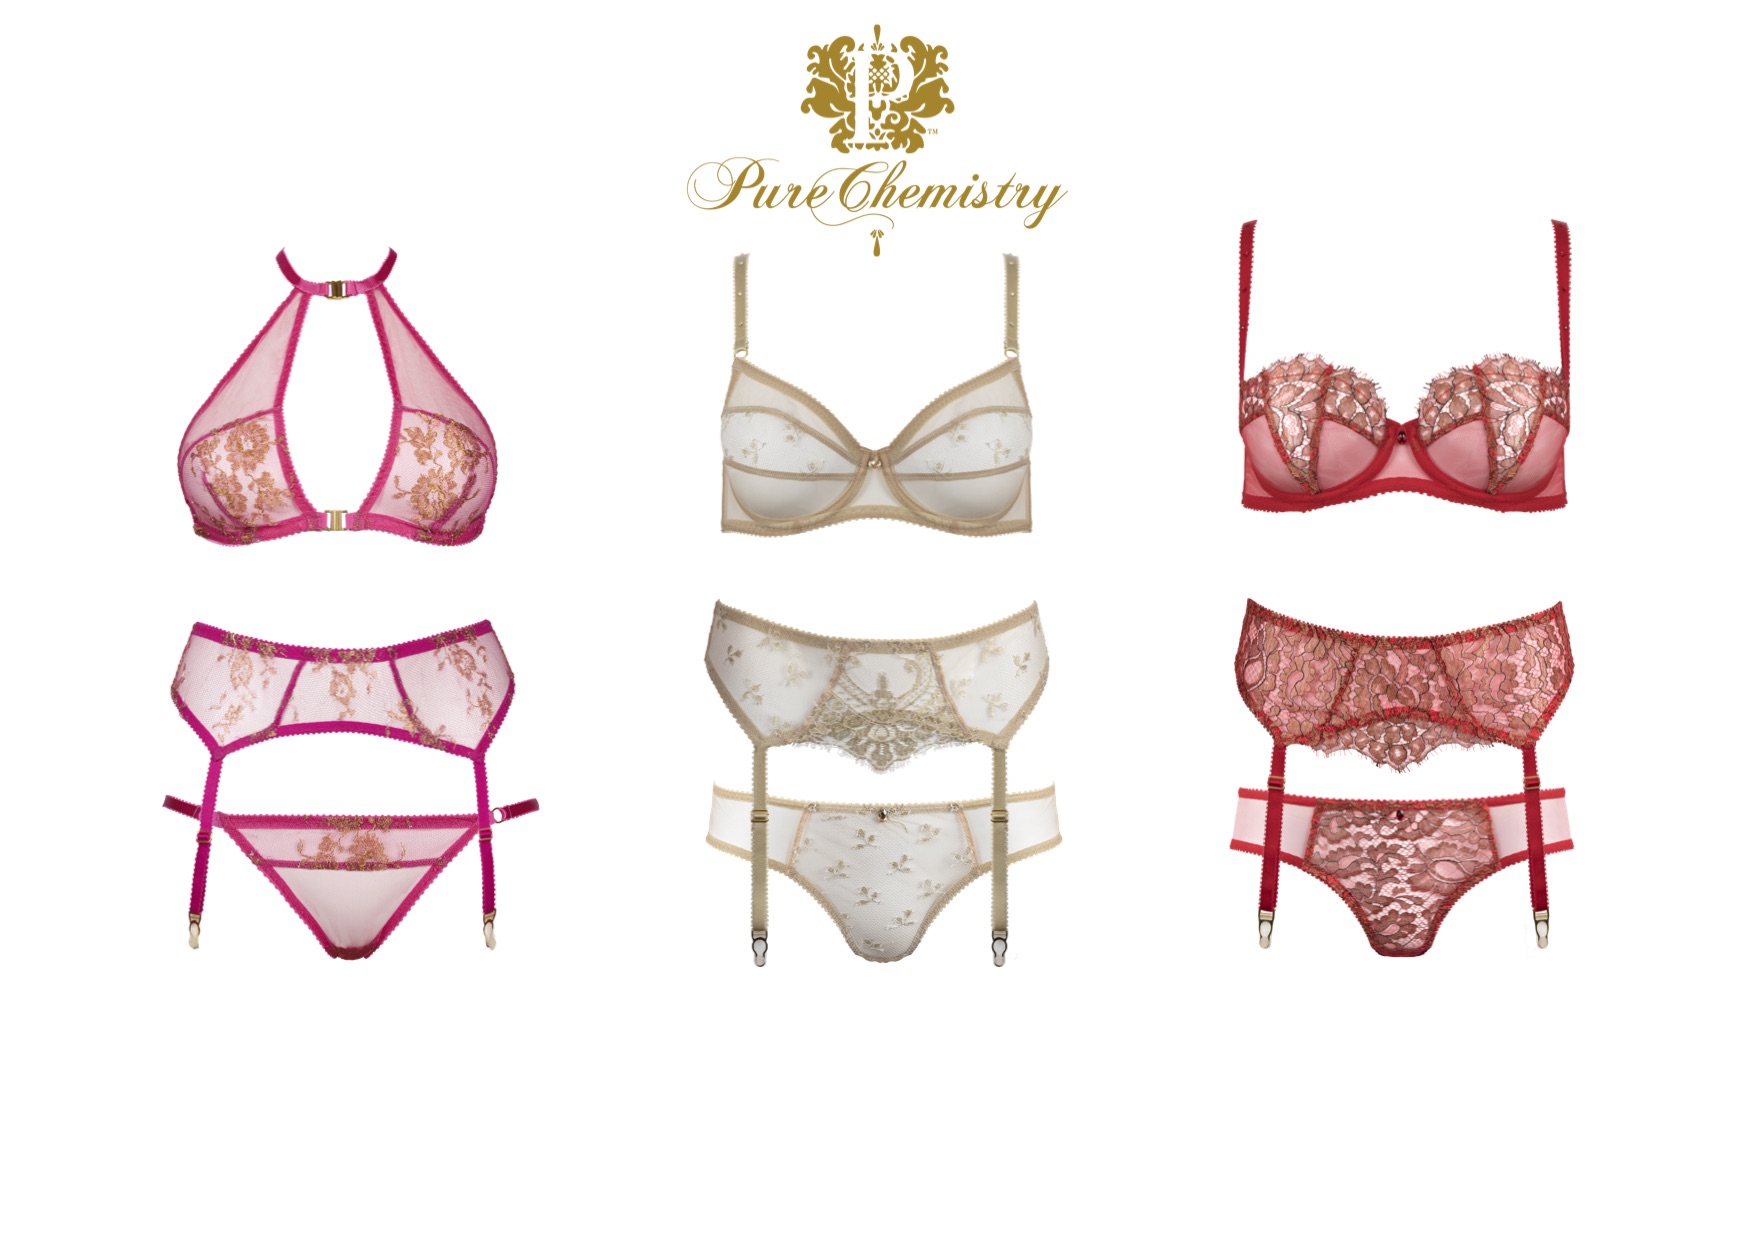 Bridal Lingerie- A burgeoning market in India